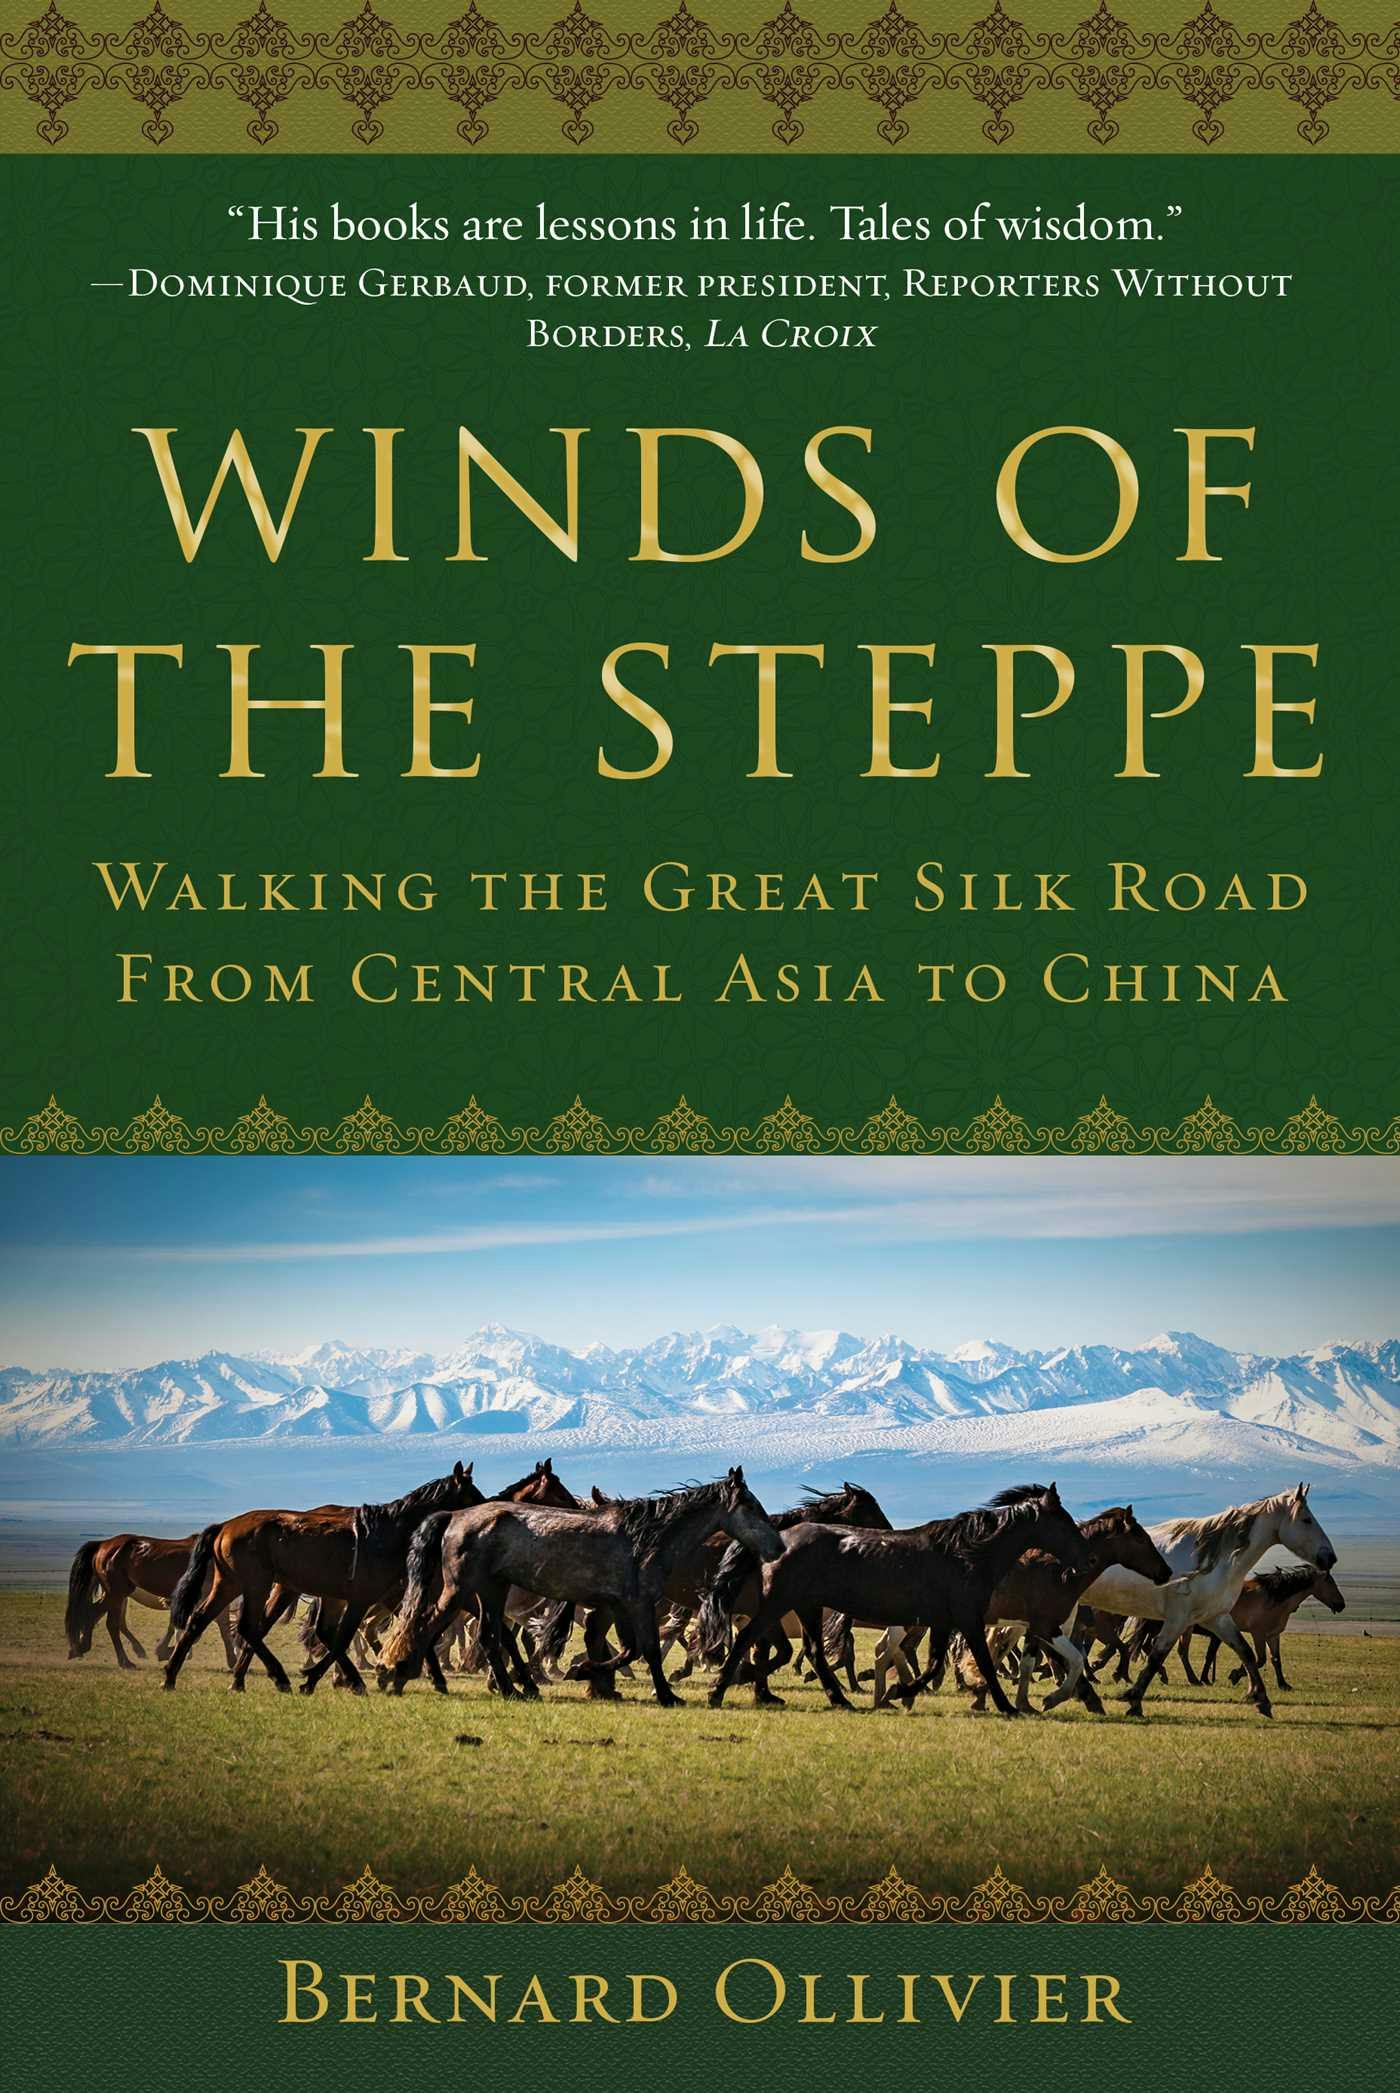 Winds of the Steppe: Walking the Great Silk Road from Central Asia to China - Bernard Ollivier